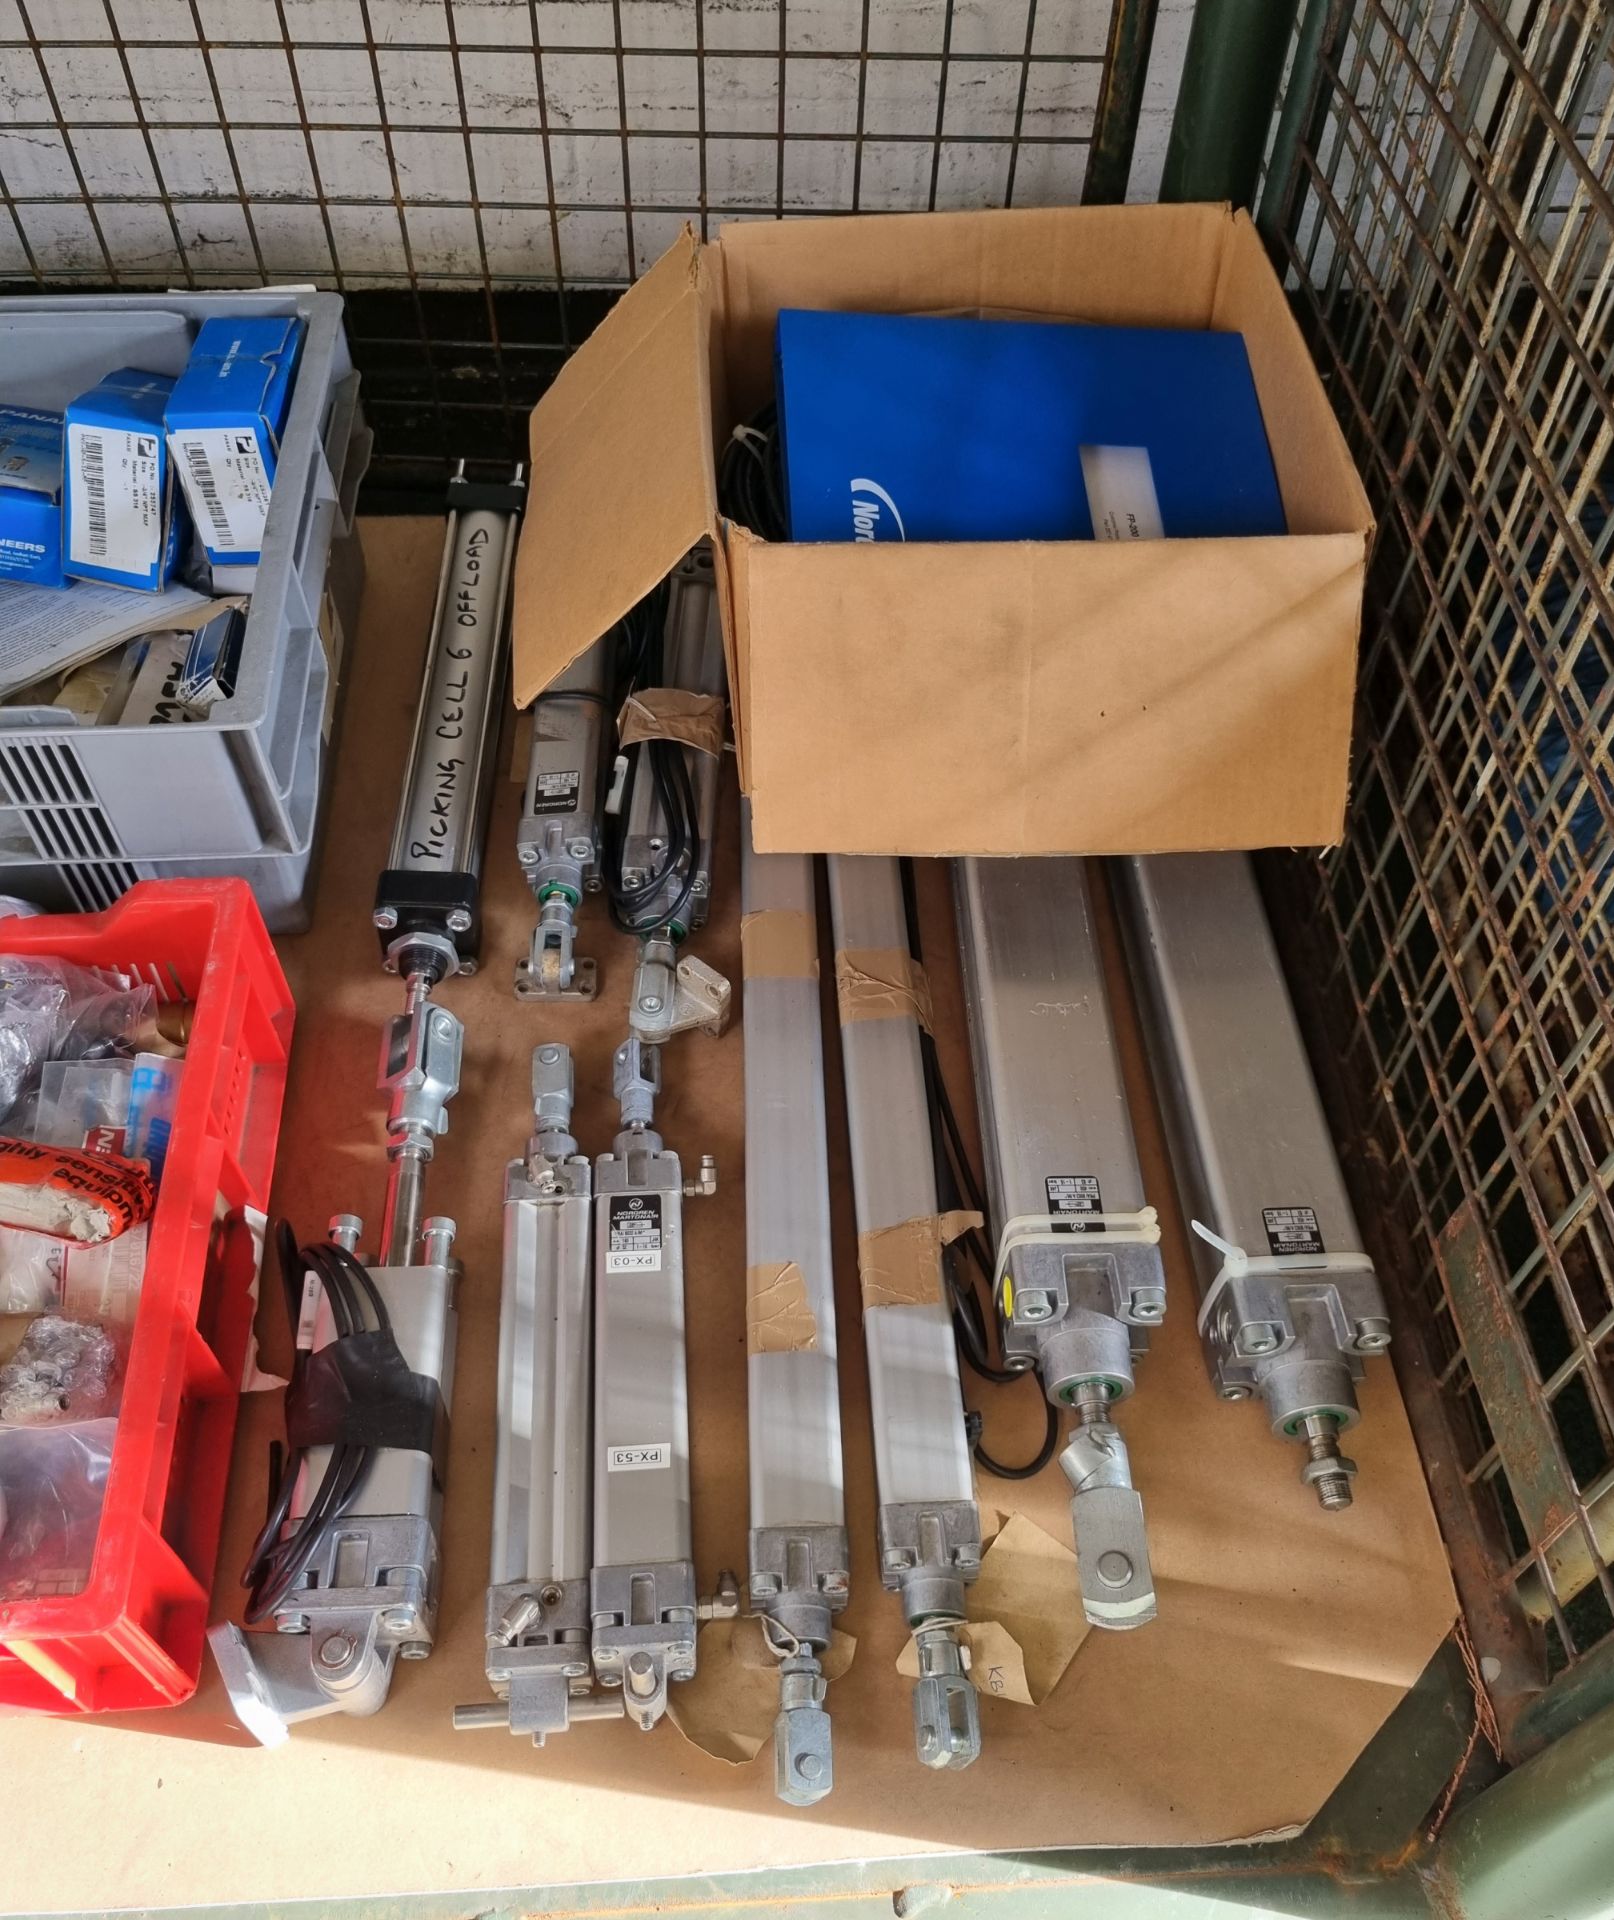 Electrical spares and consumables - Norgren pneumatic cylinders, dial gauges, valves, switches - Bild 2 aus 4